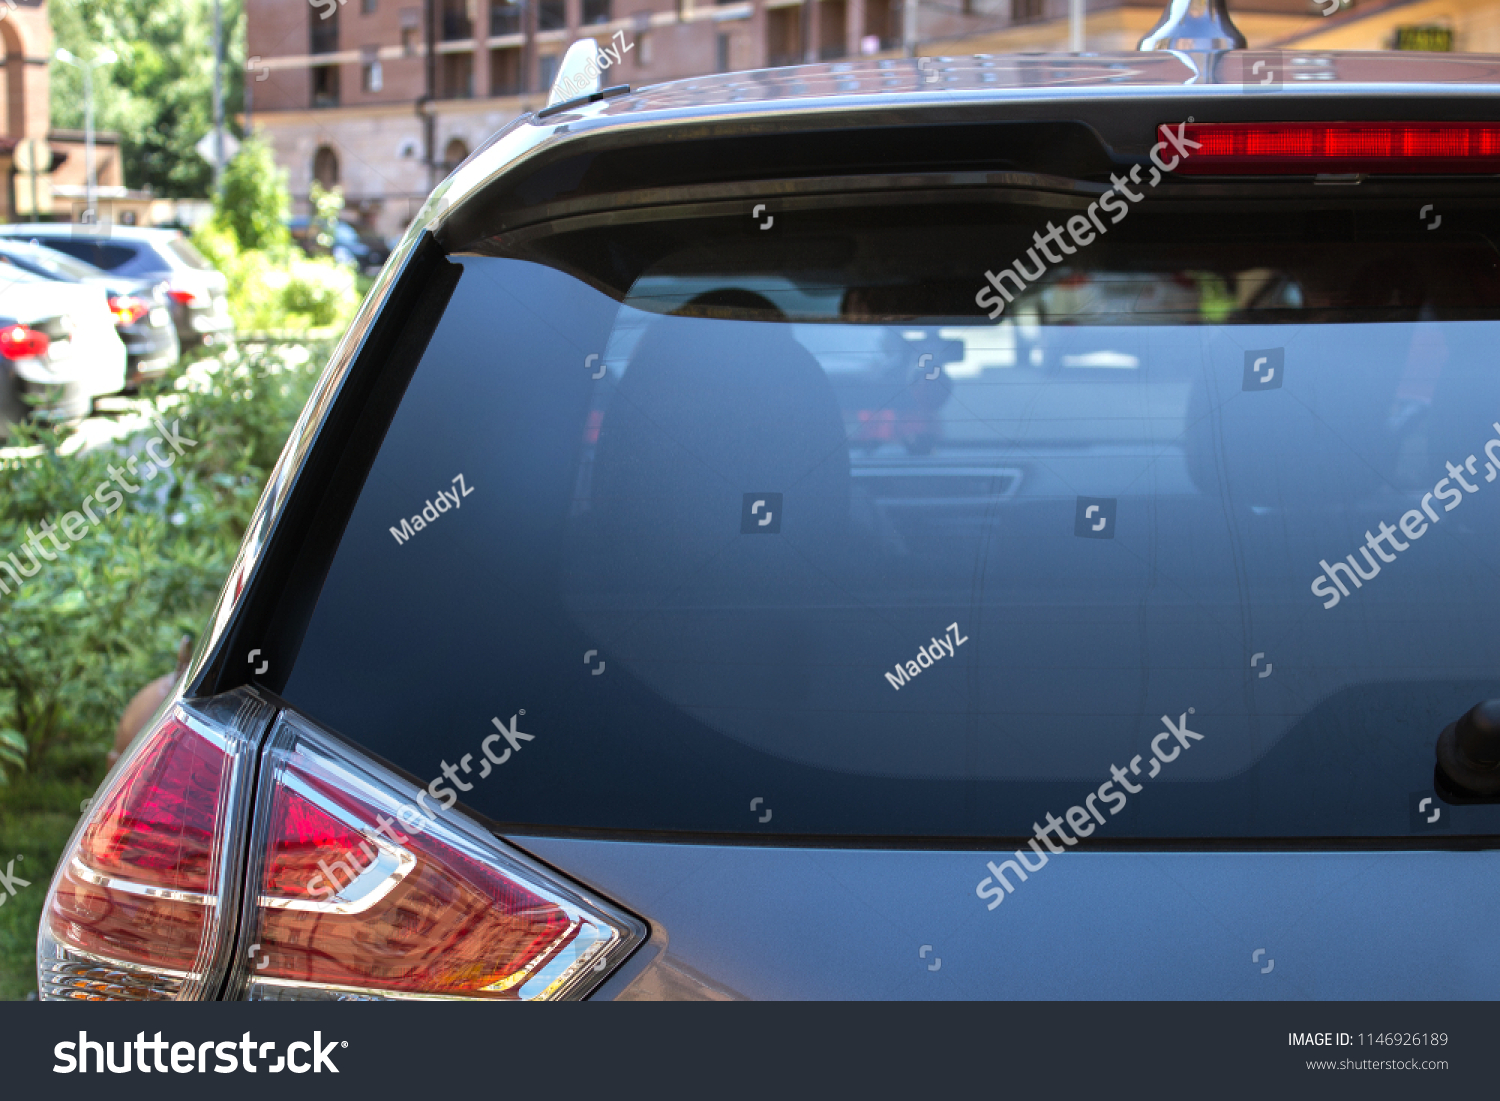 Back window of a car parked on the street in summer sunny day, rear view. Mock-up for sticker or decals #1146926189